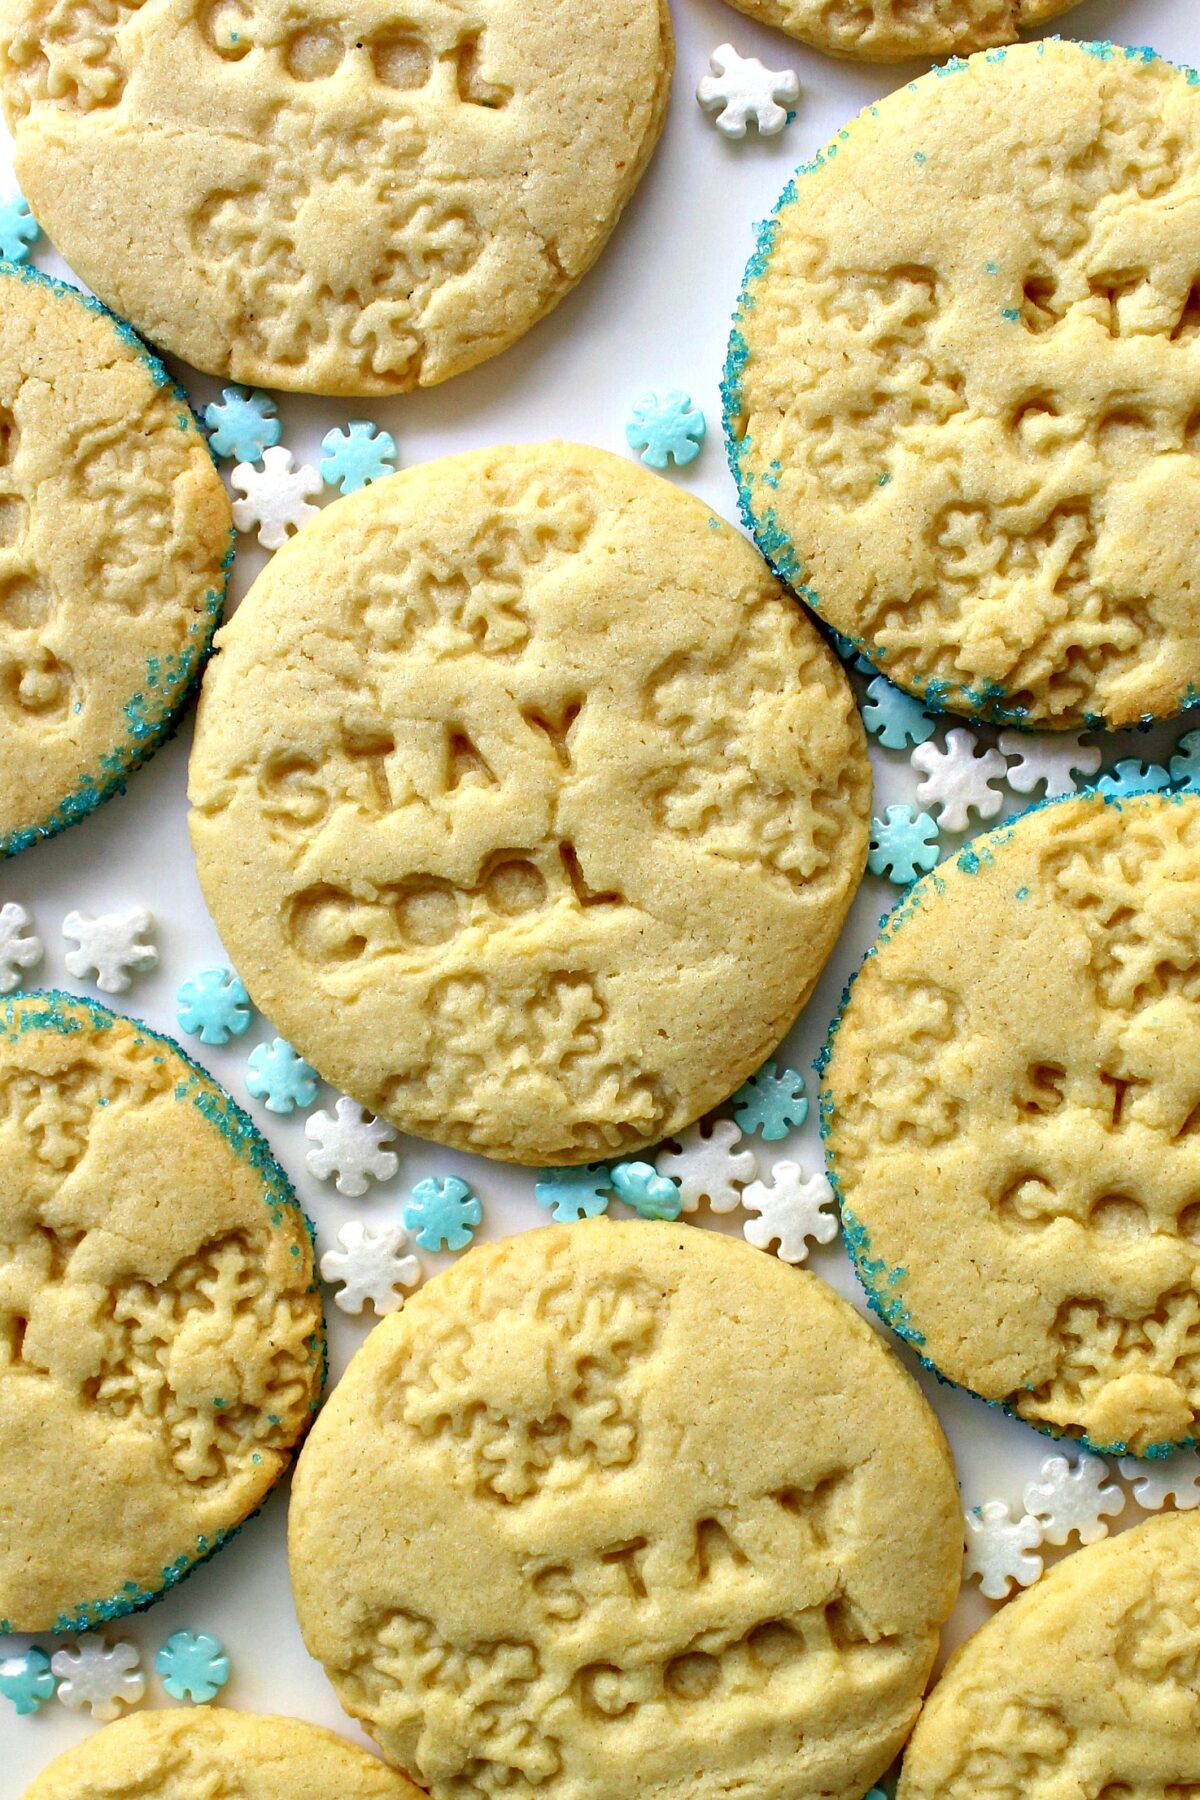 Round sugar cookies stamped with snowflakes and the words "stay cool".